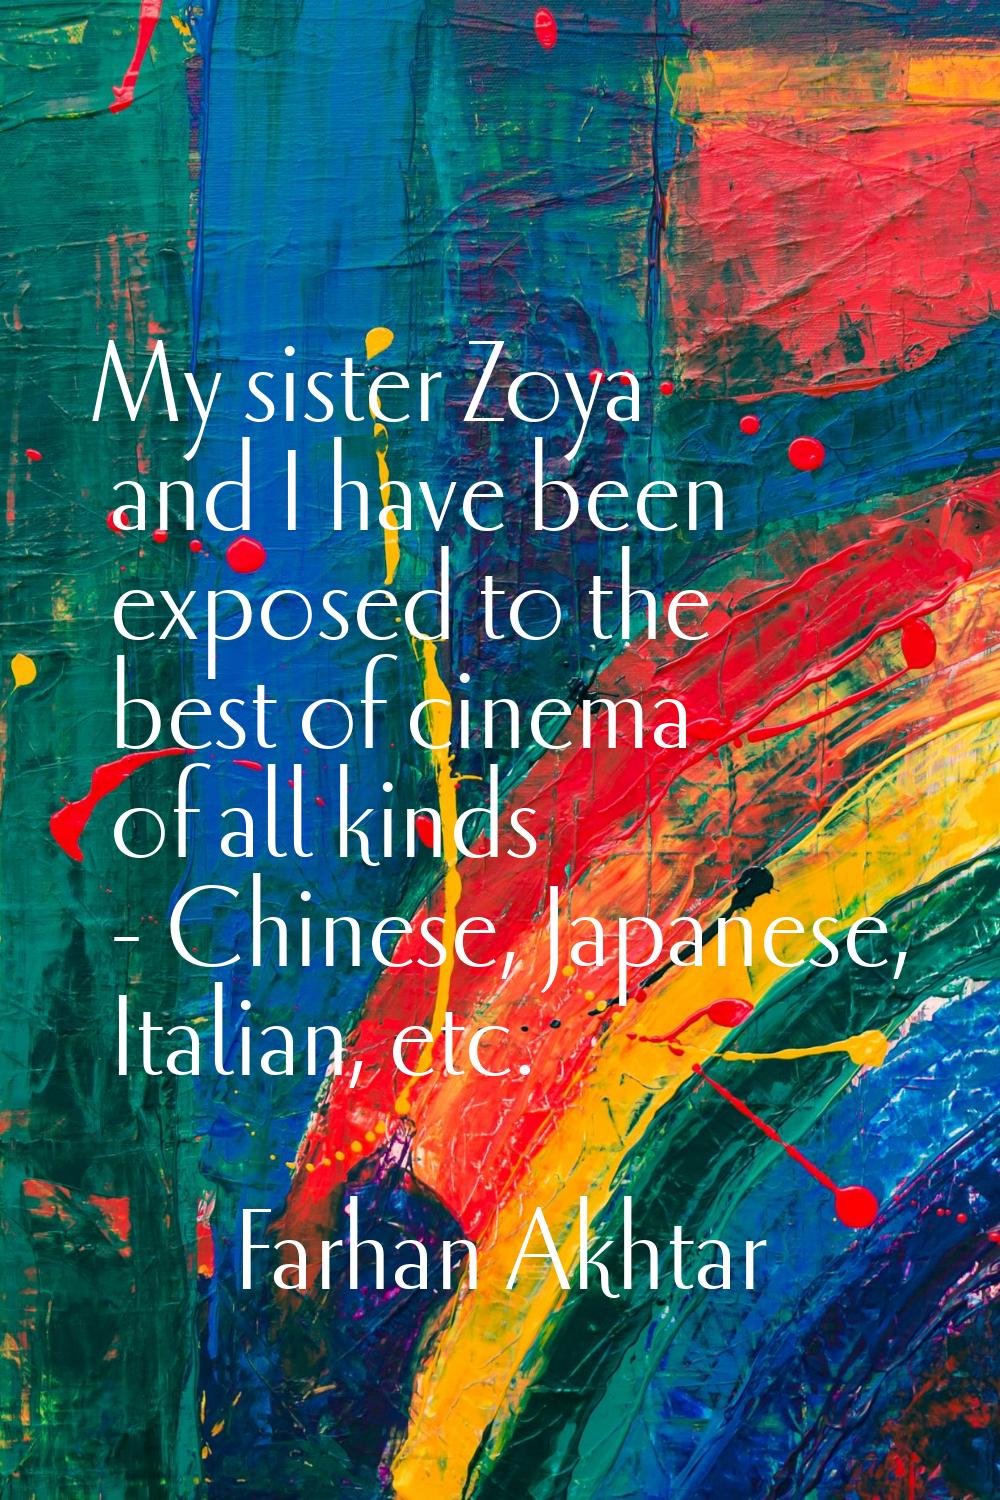 My sister Zoya and I have been exposed to the best of cinema of all kinds - Chinese, Japanese, Ital